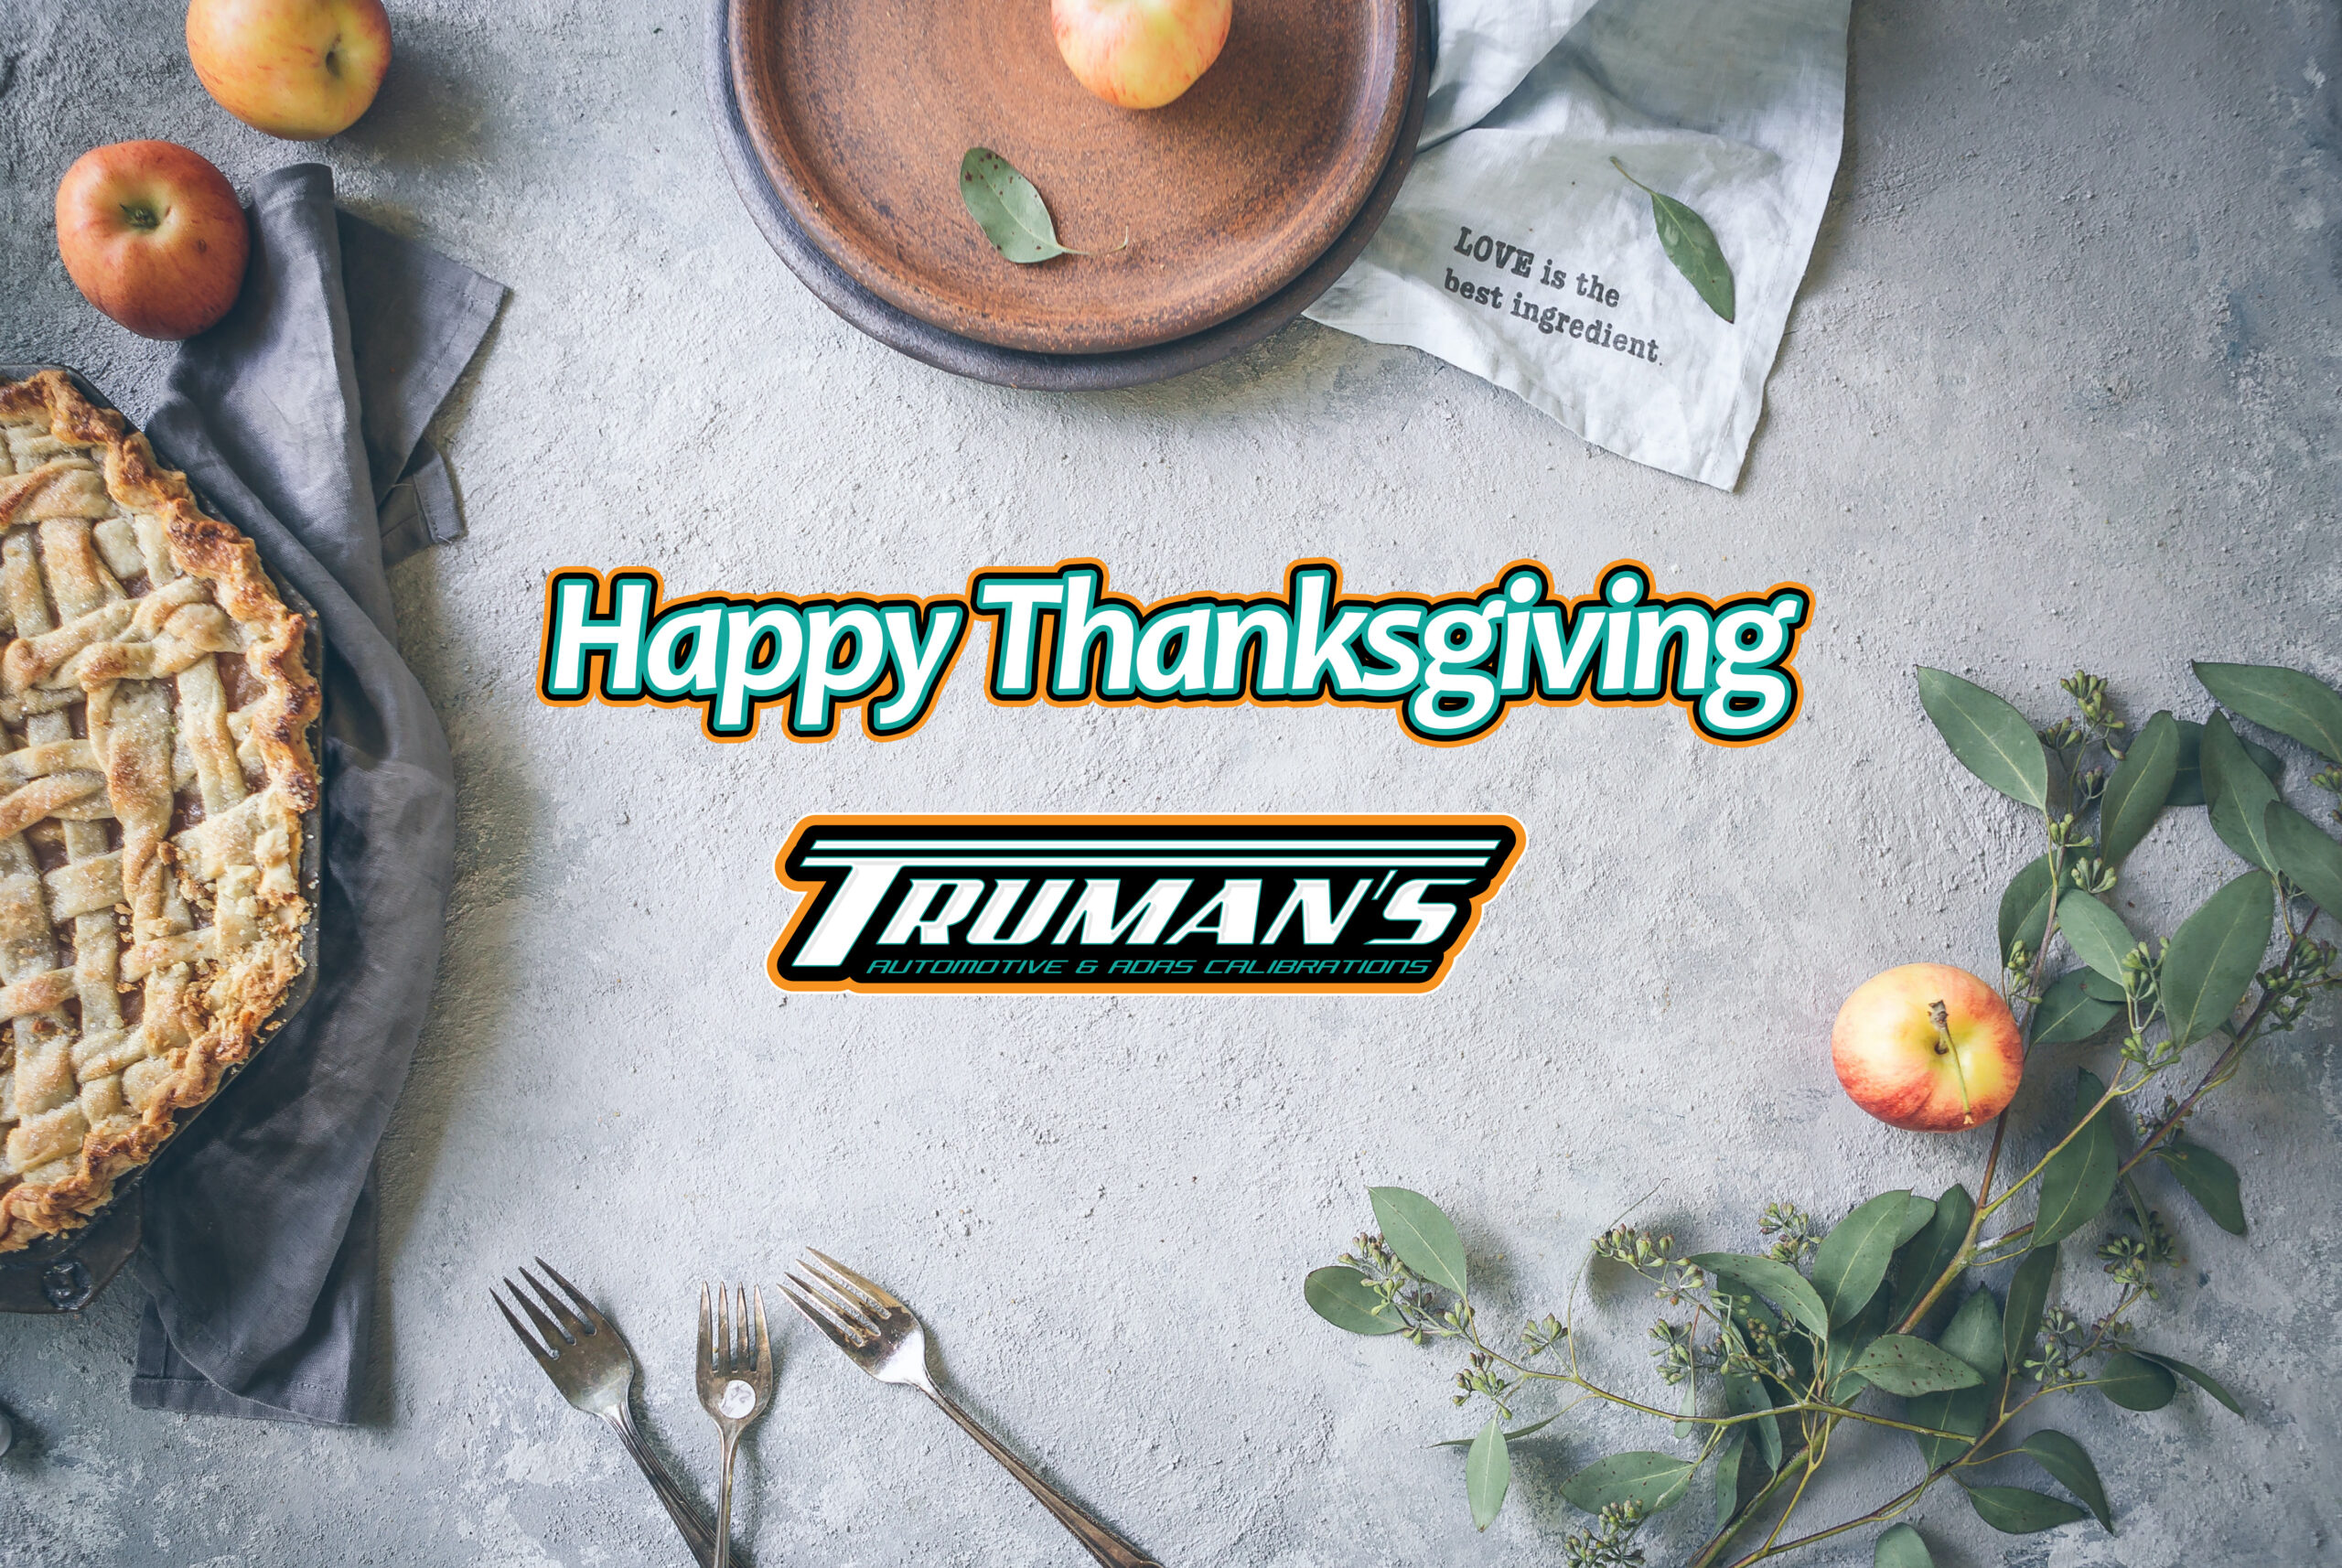 Happy Thanksgiving from Truman's Automotive & ADAS Calibrations